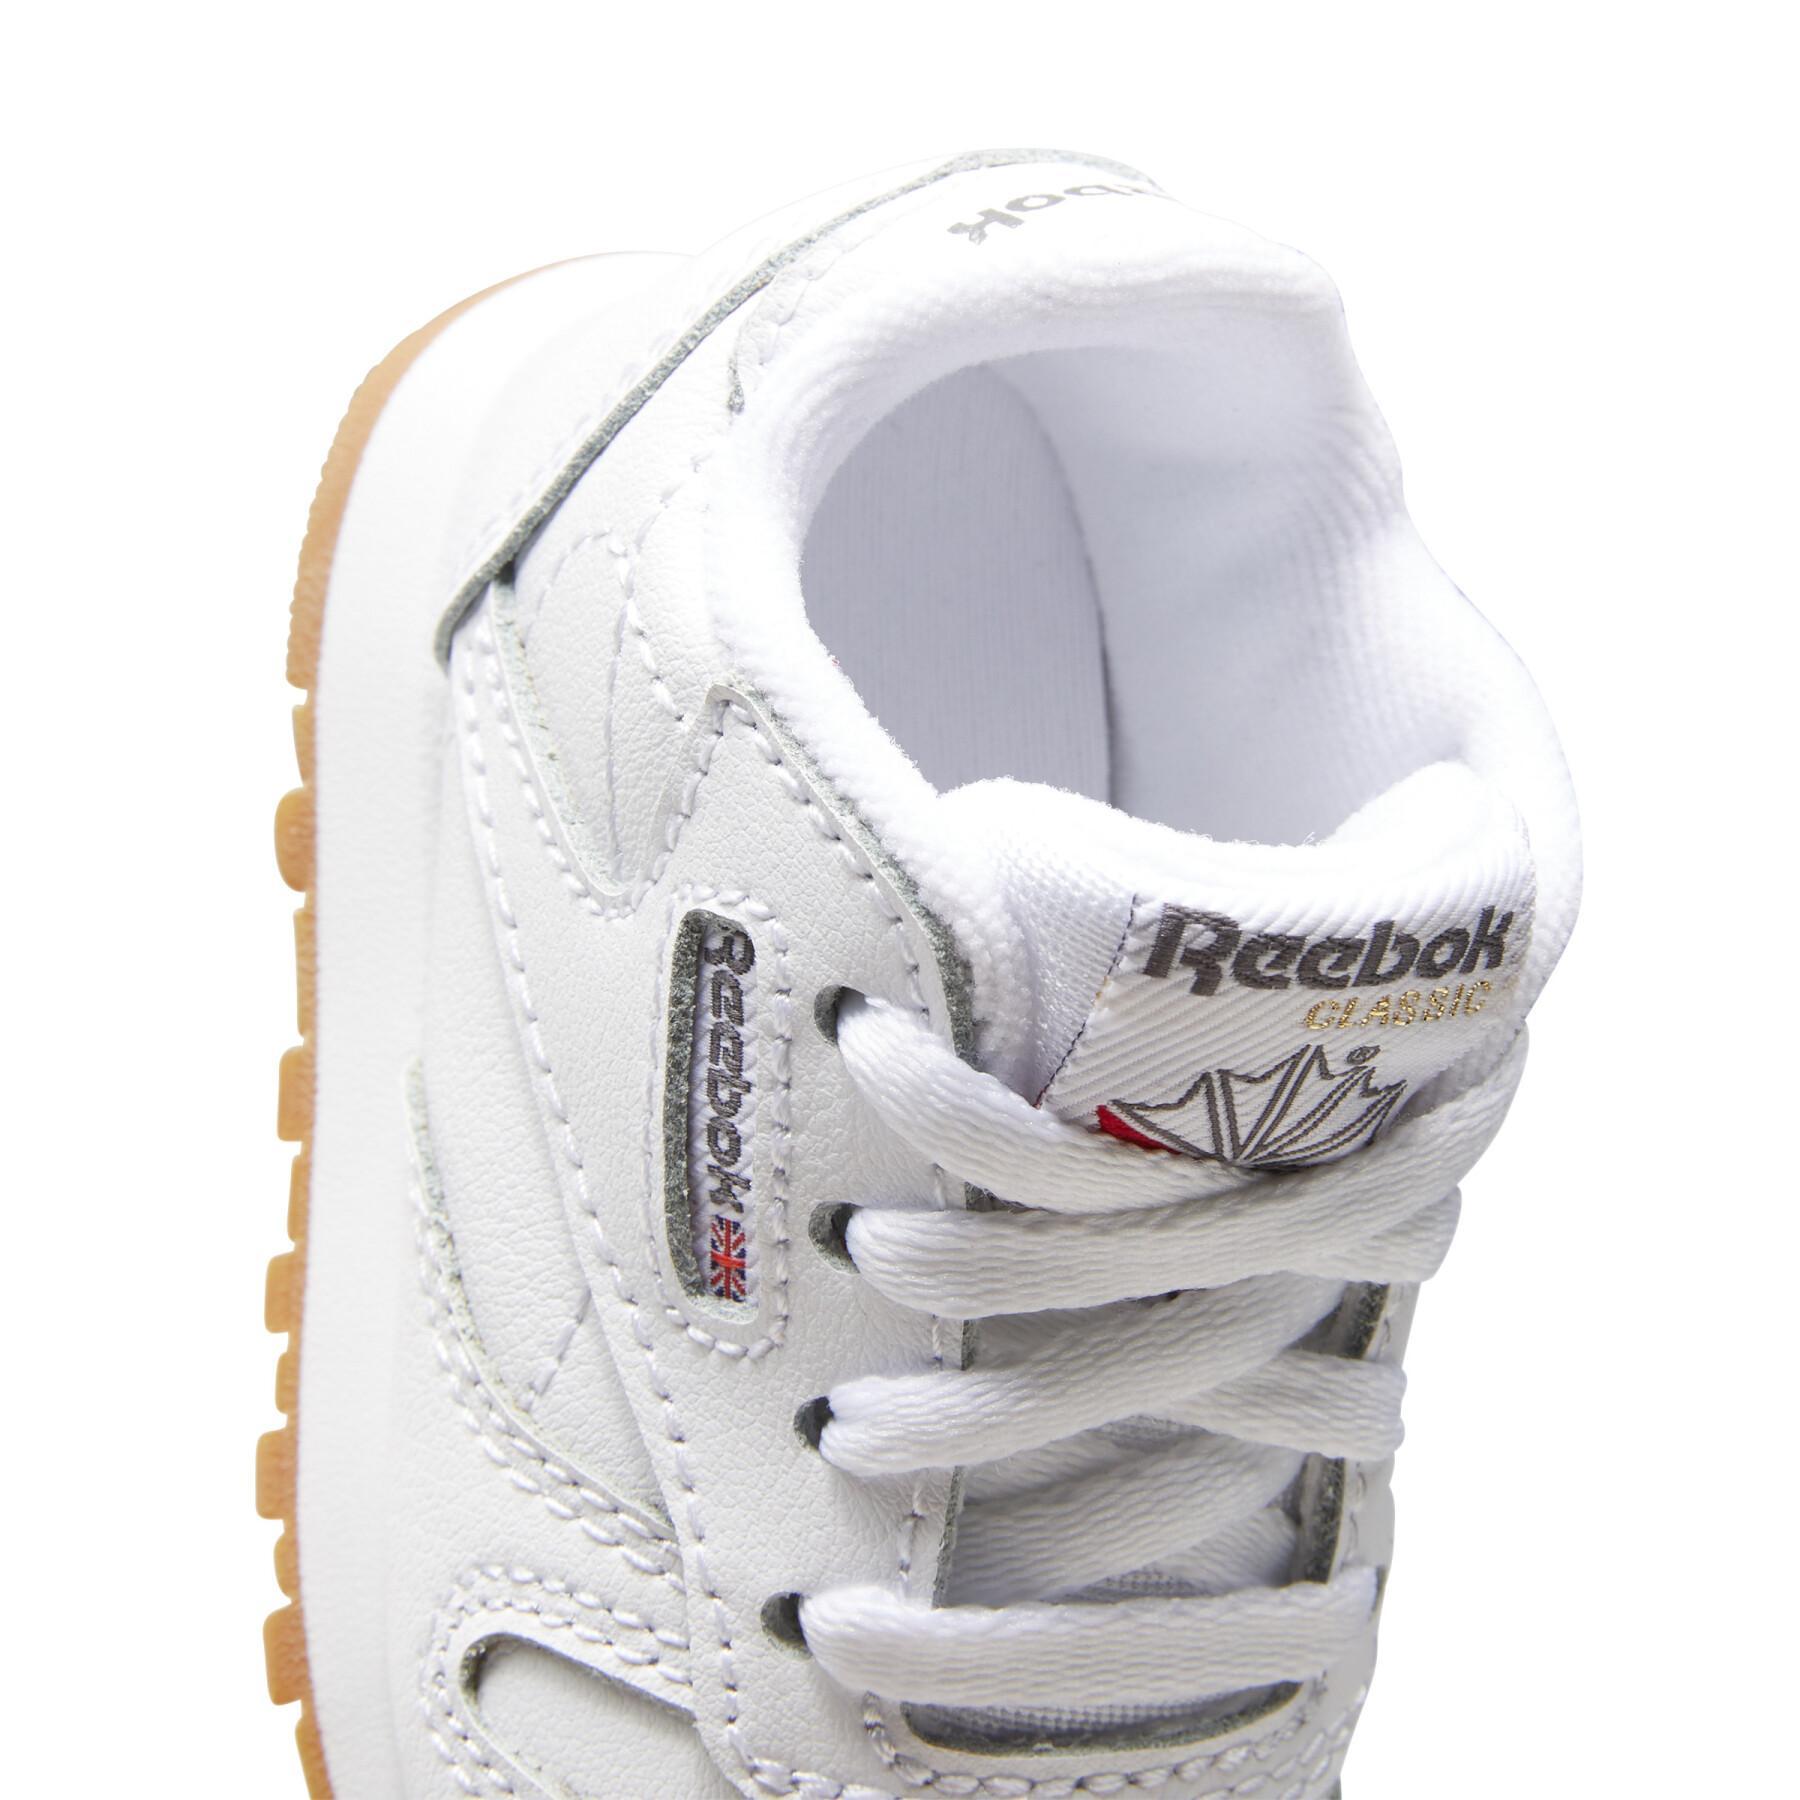 Children's shoes Reebok Classic Leather